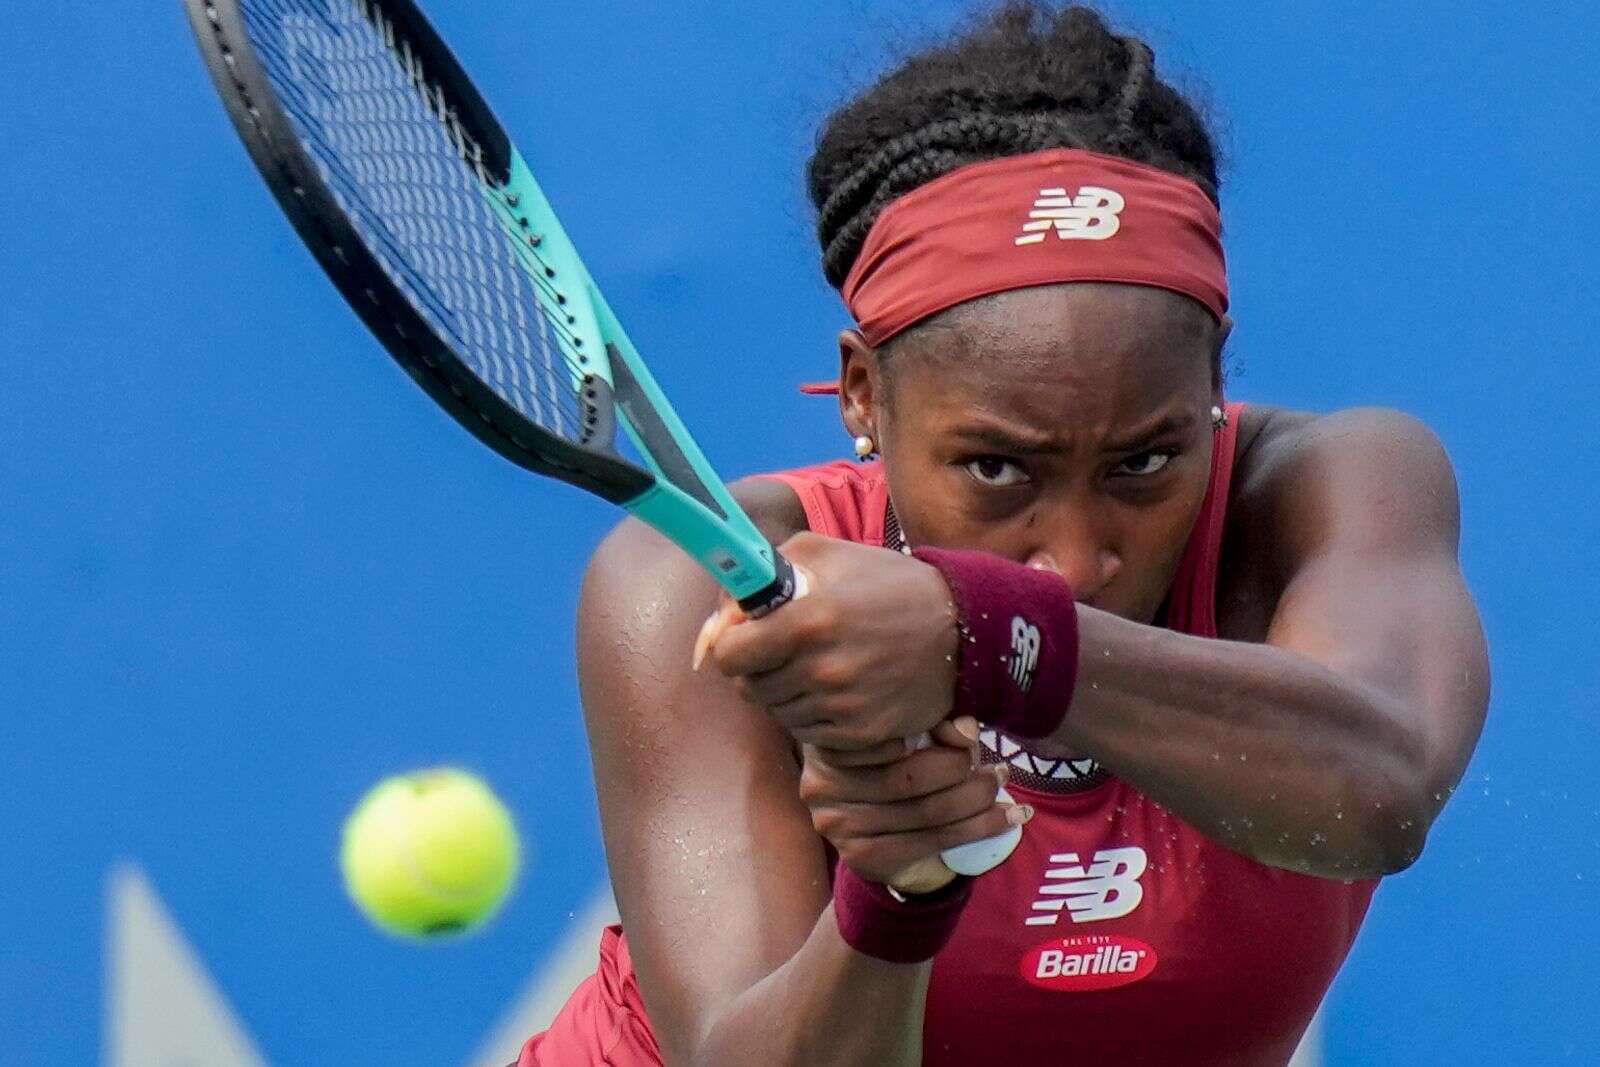 gauff keen to end claycourt trophy drought ahead of french open tilt